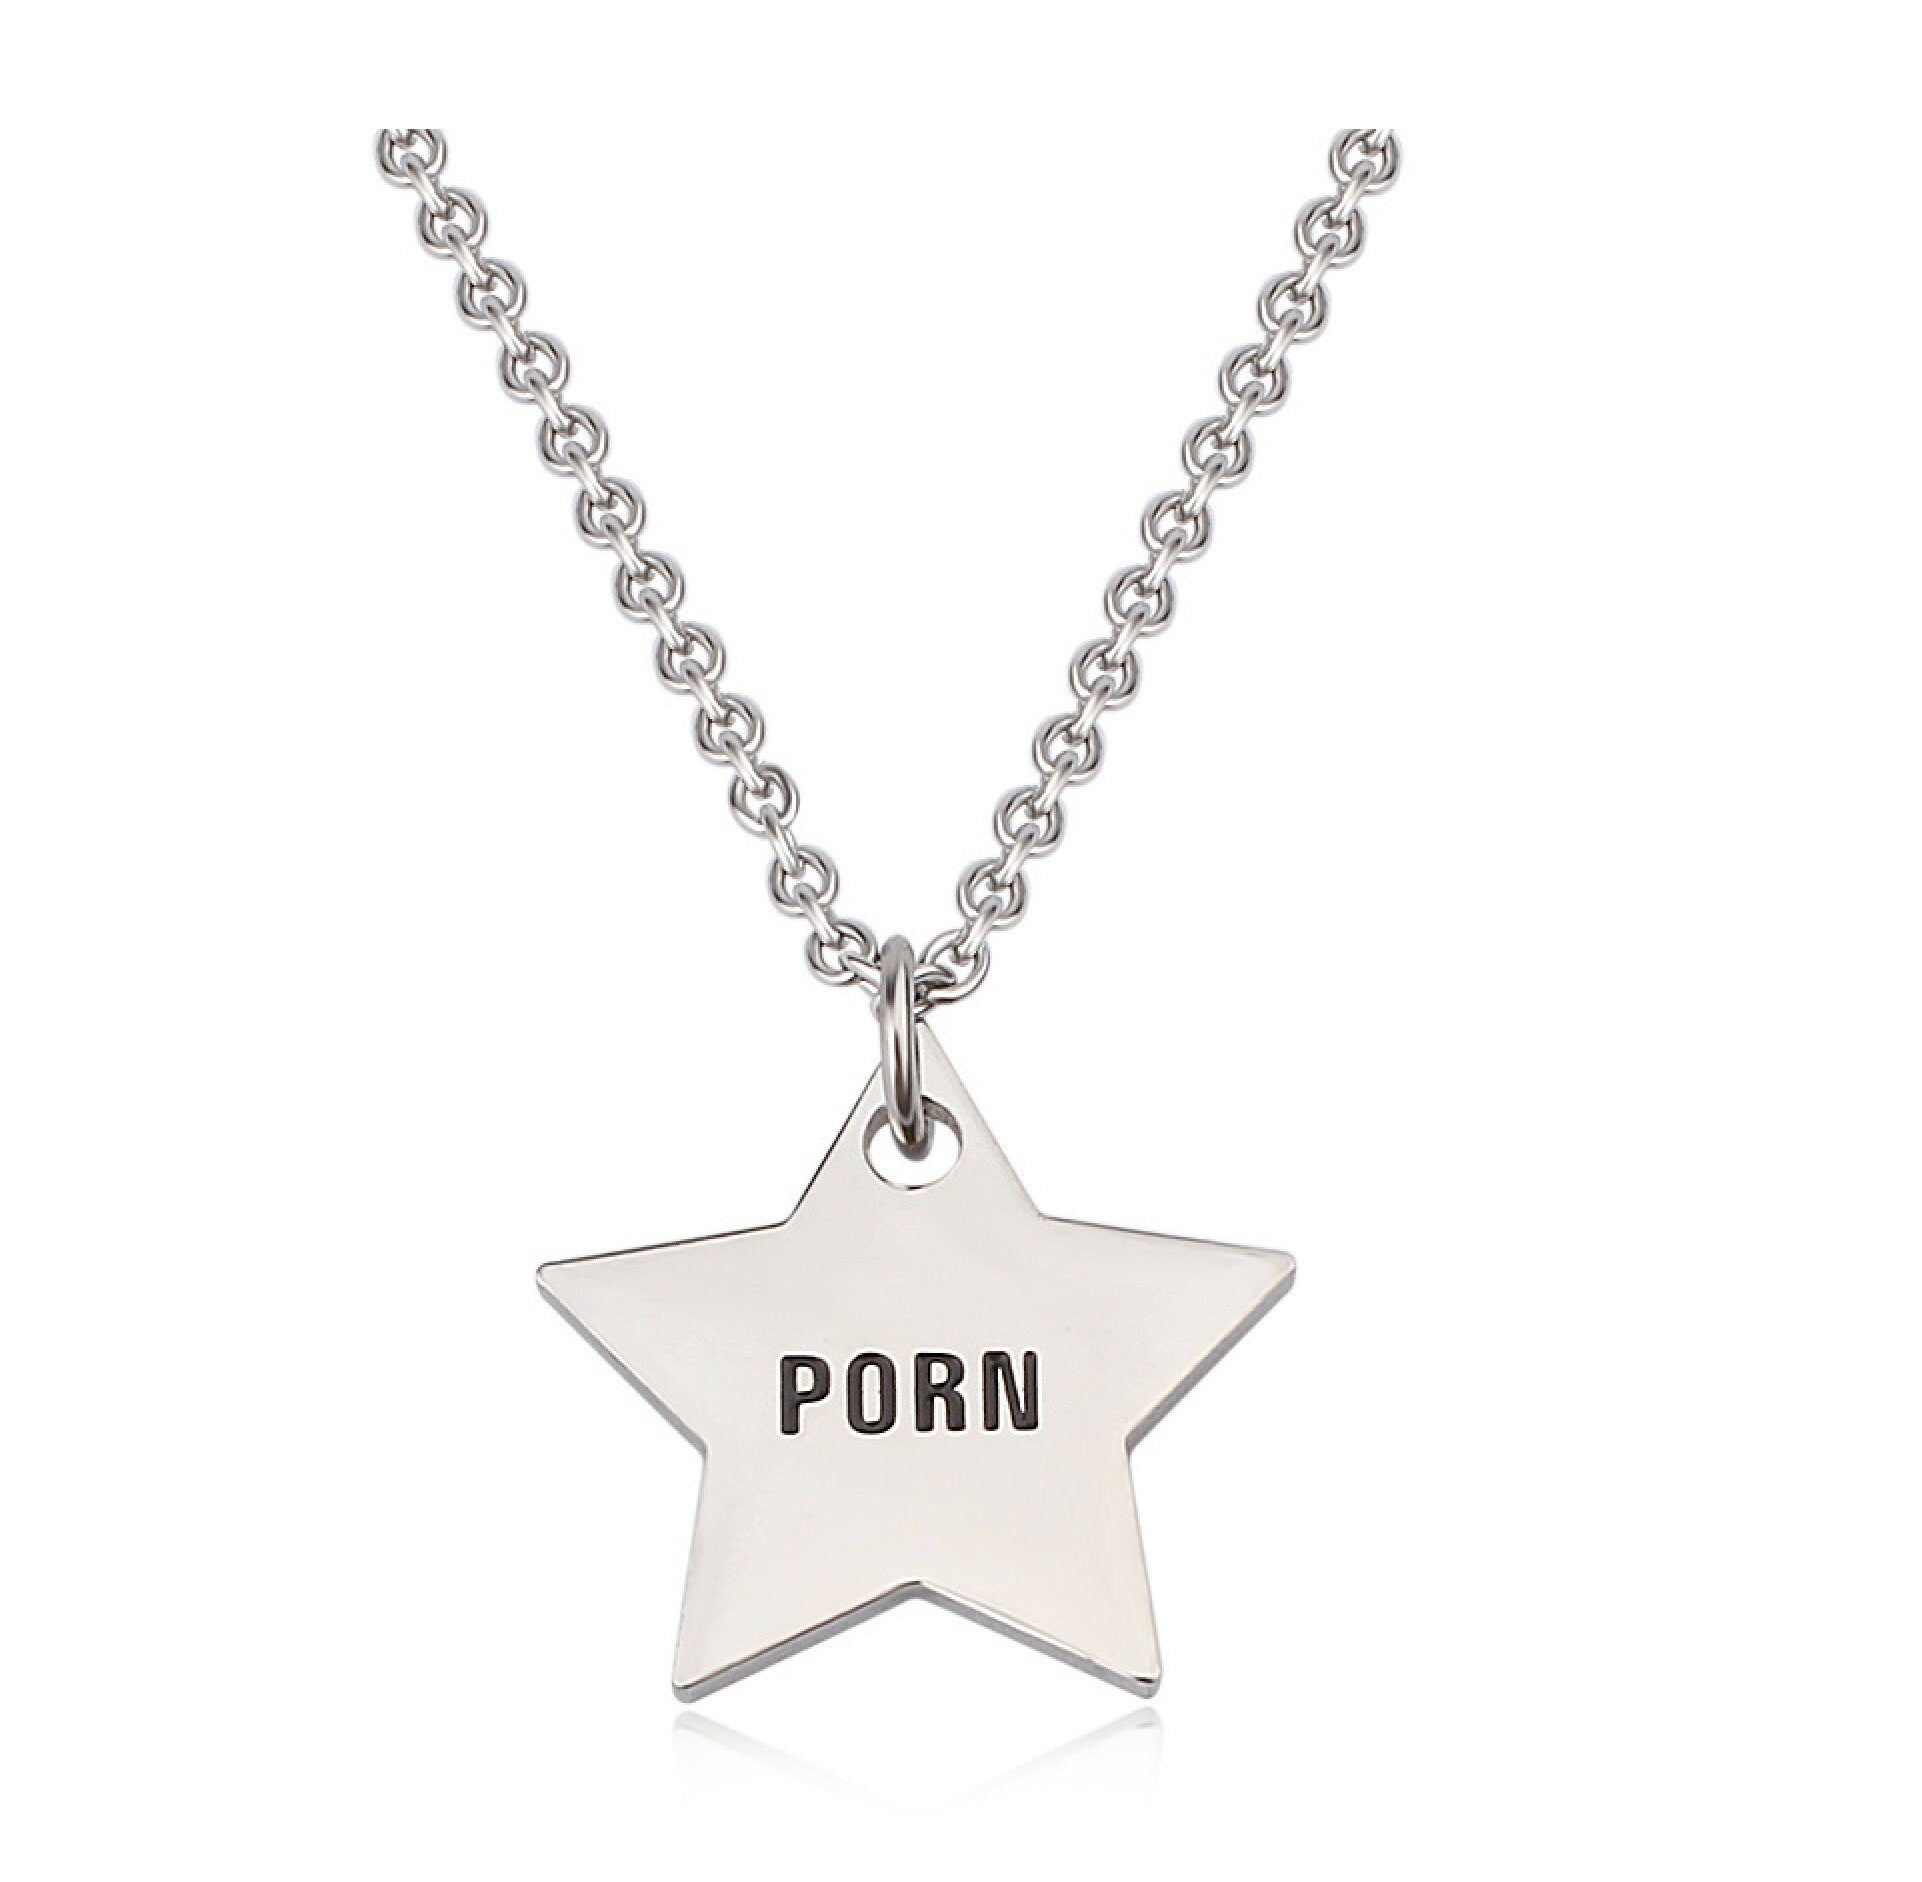 Porn Star - Charm Necklace or Anklet - Stainless Steel | HWC LLC